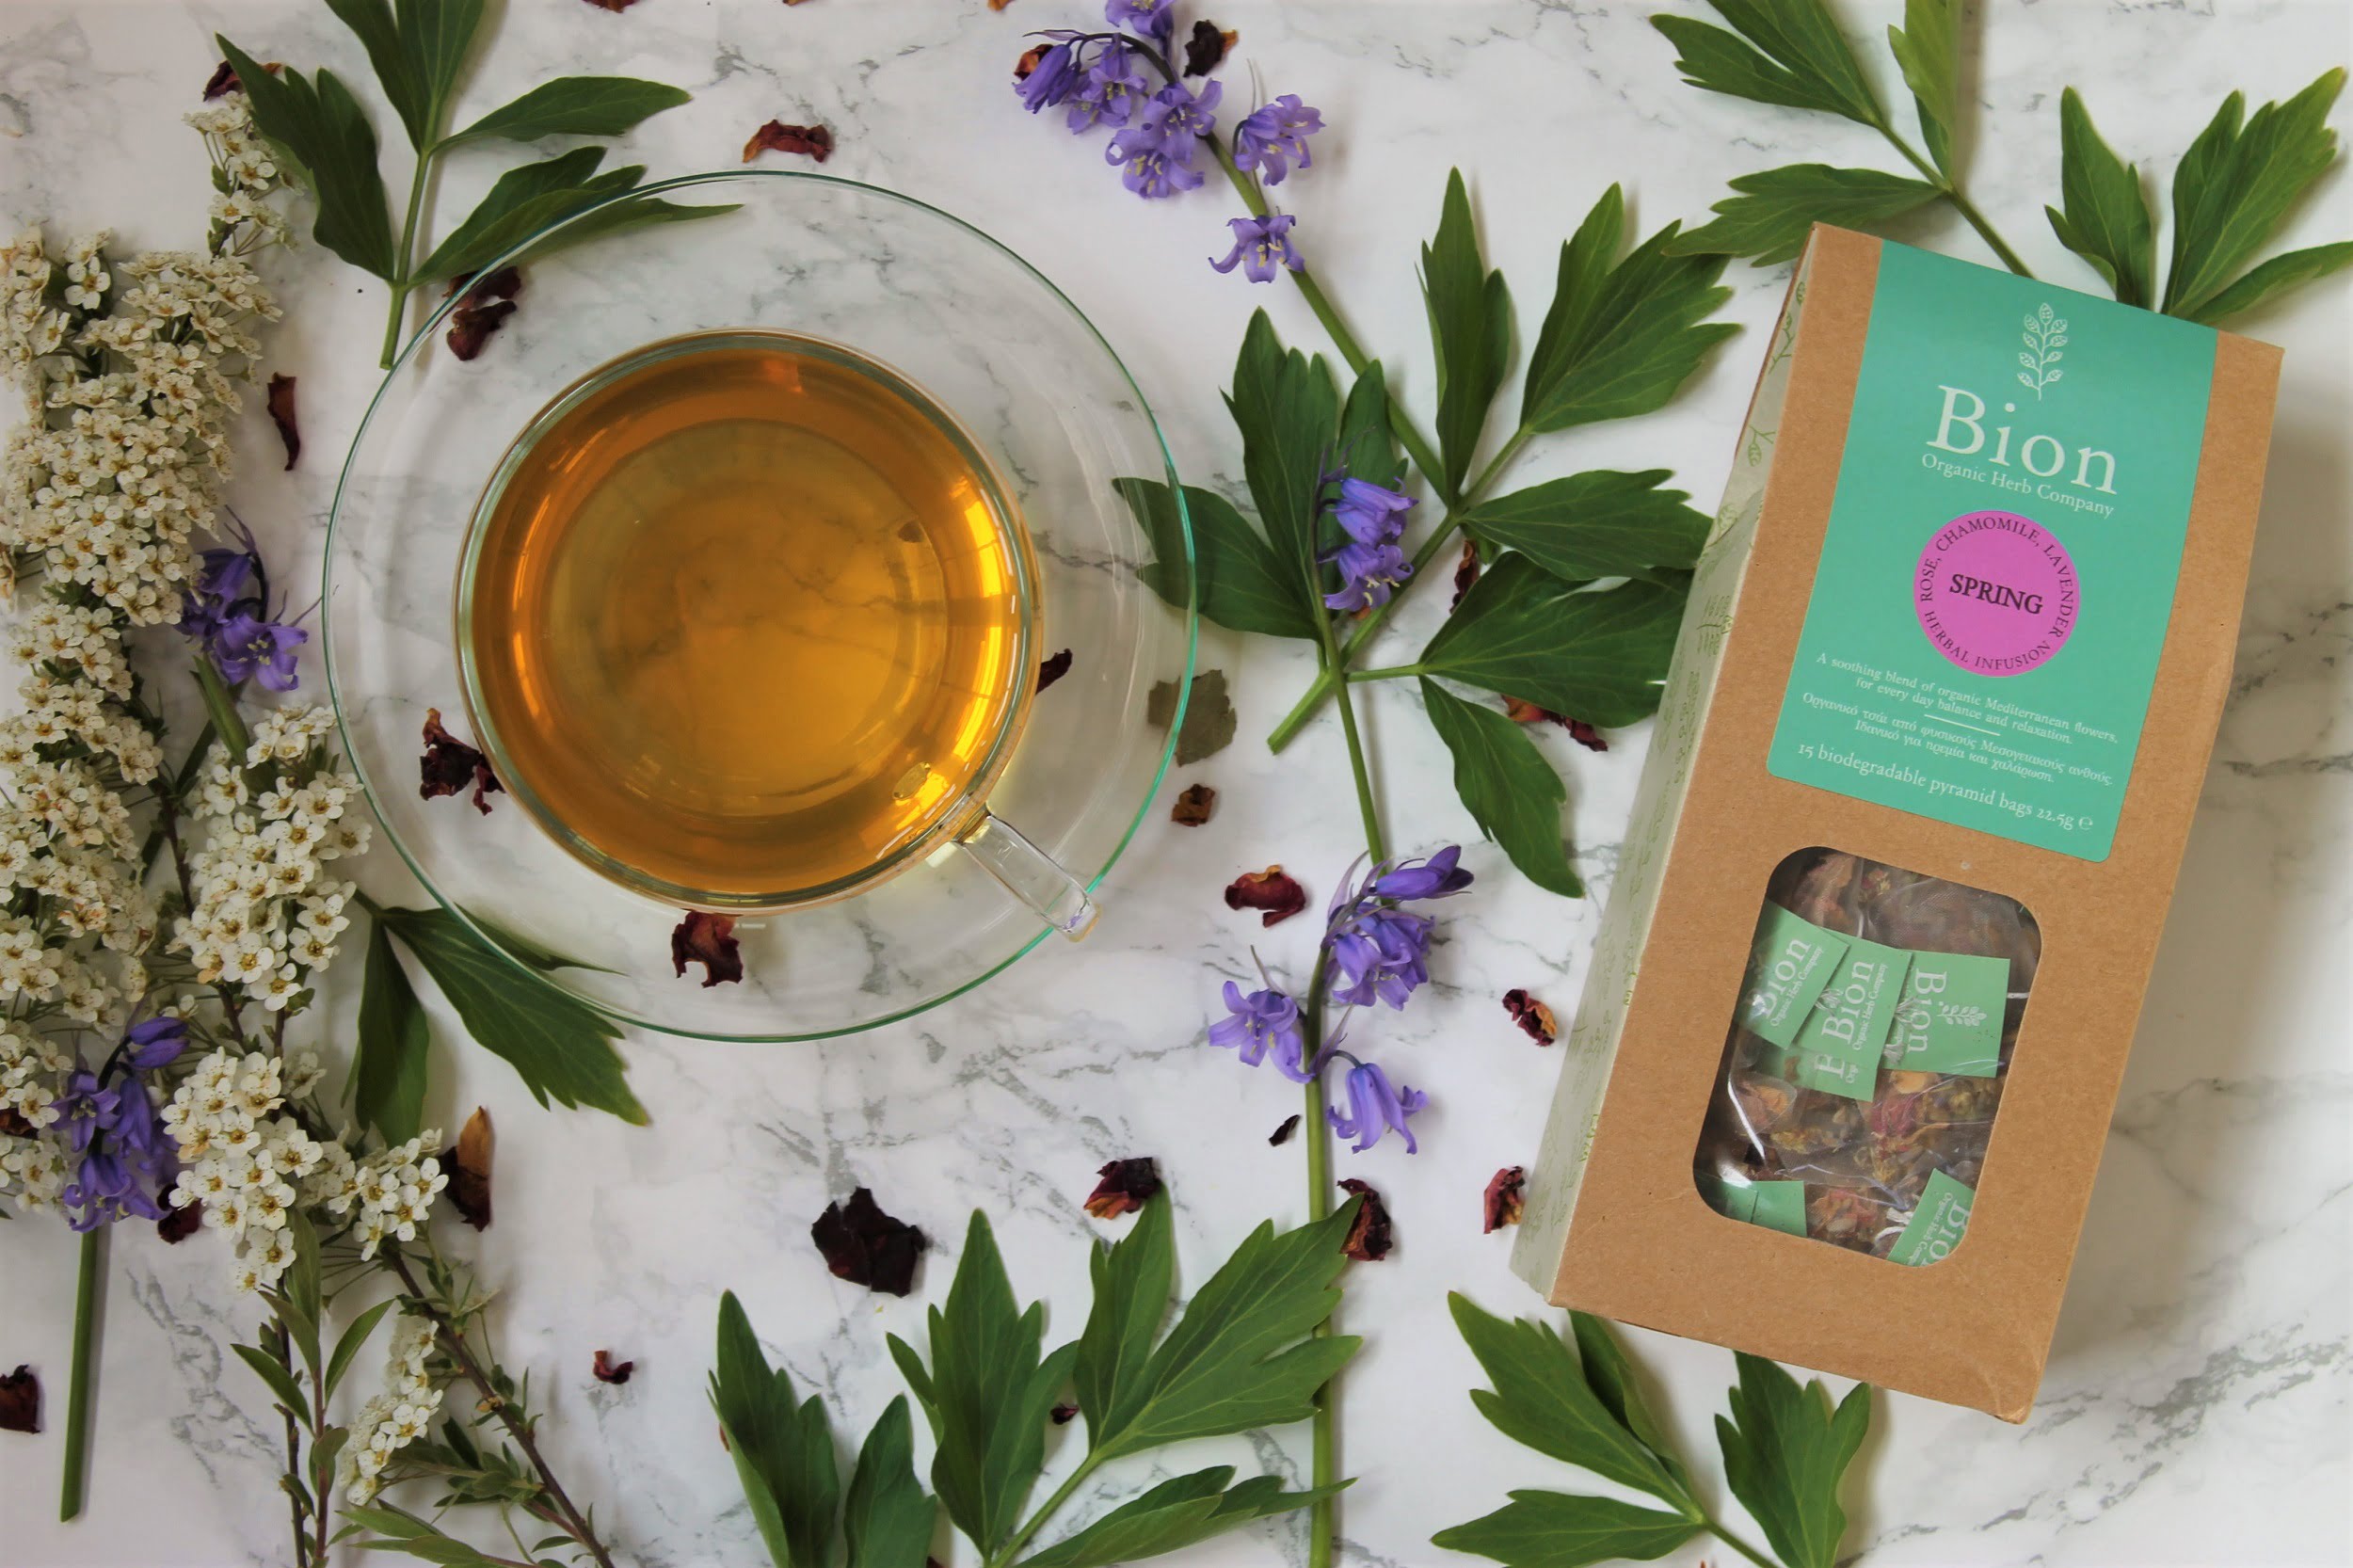 Bion Spring Floral Infusion Tea Review